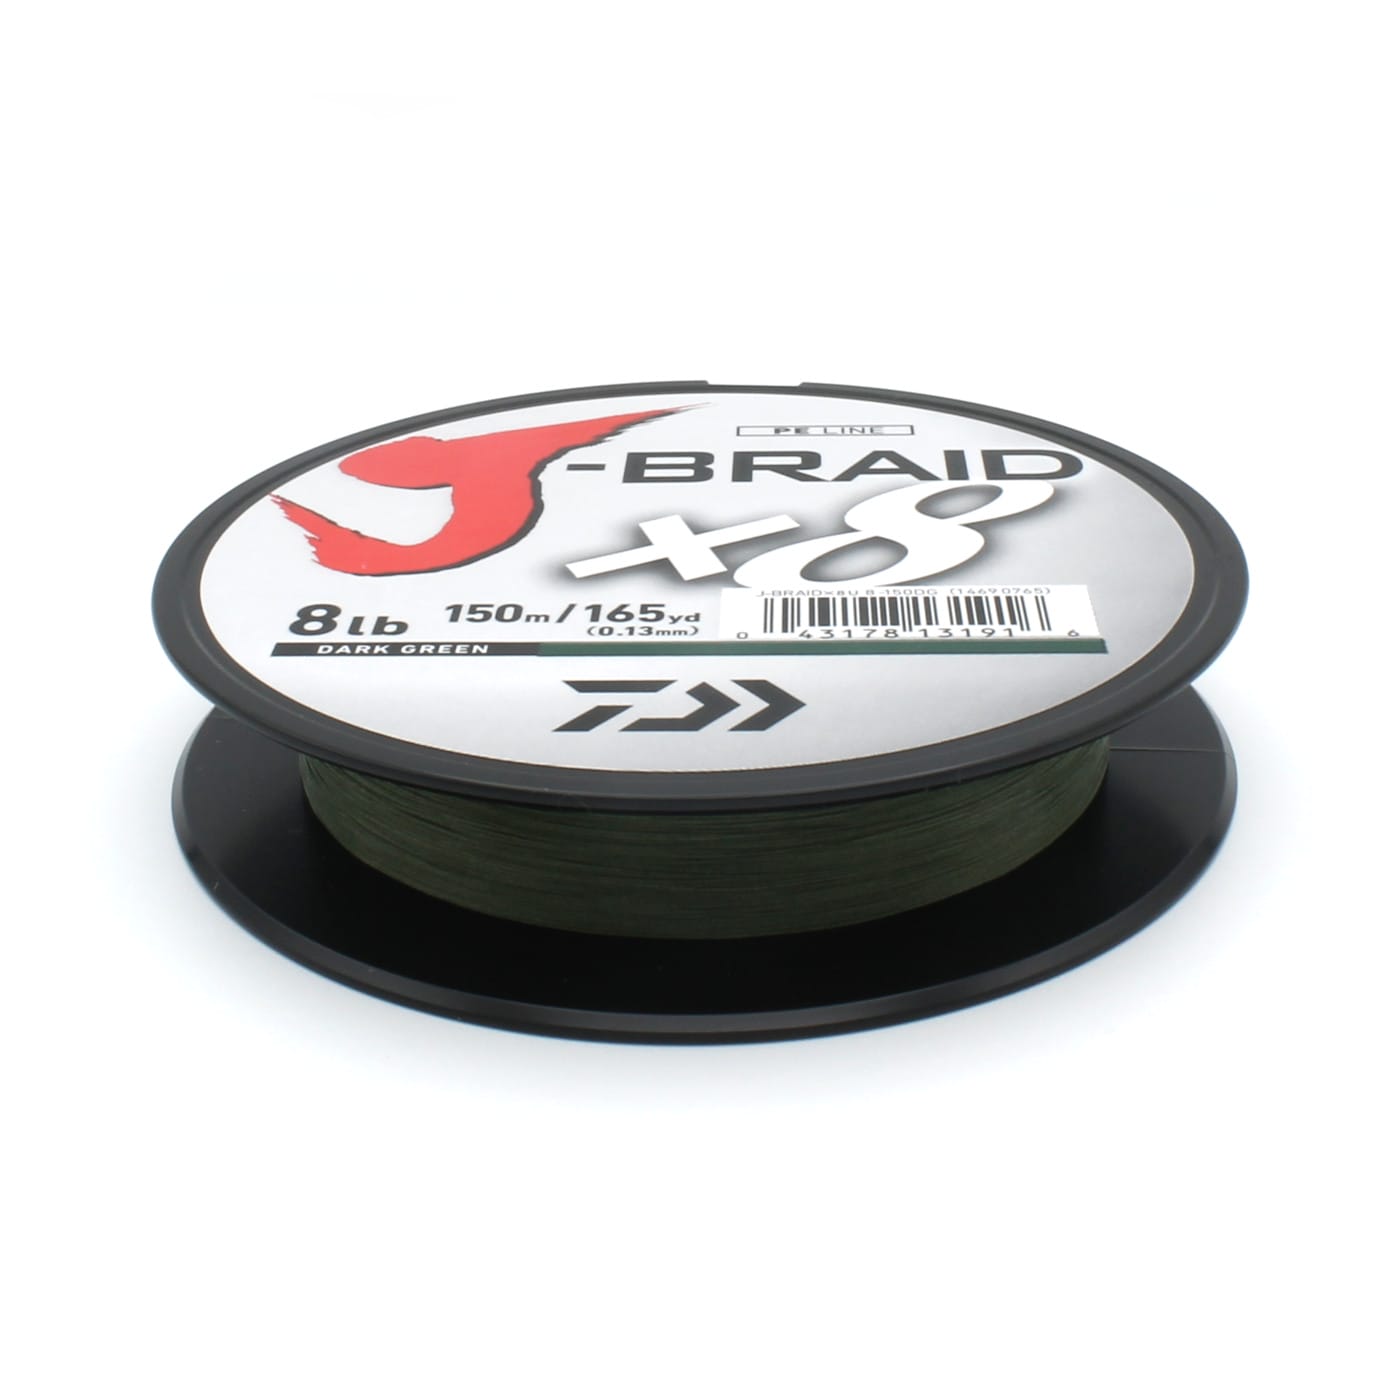 Super Strong 9 Strand Braided Fishing Line PE Fishing Line 1500M Length,  22LB 200LB Strength, Multifilament For Carp Fishing In Saltwater/Freshwater  From Jace888, $88.37